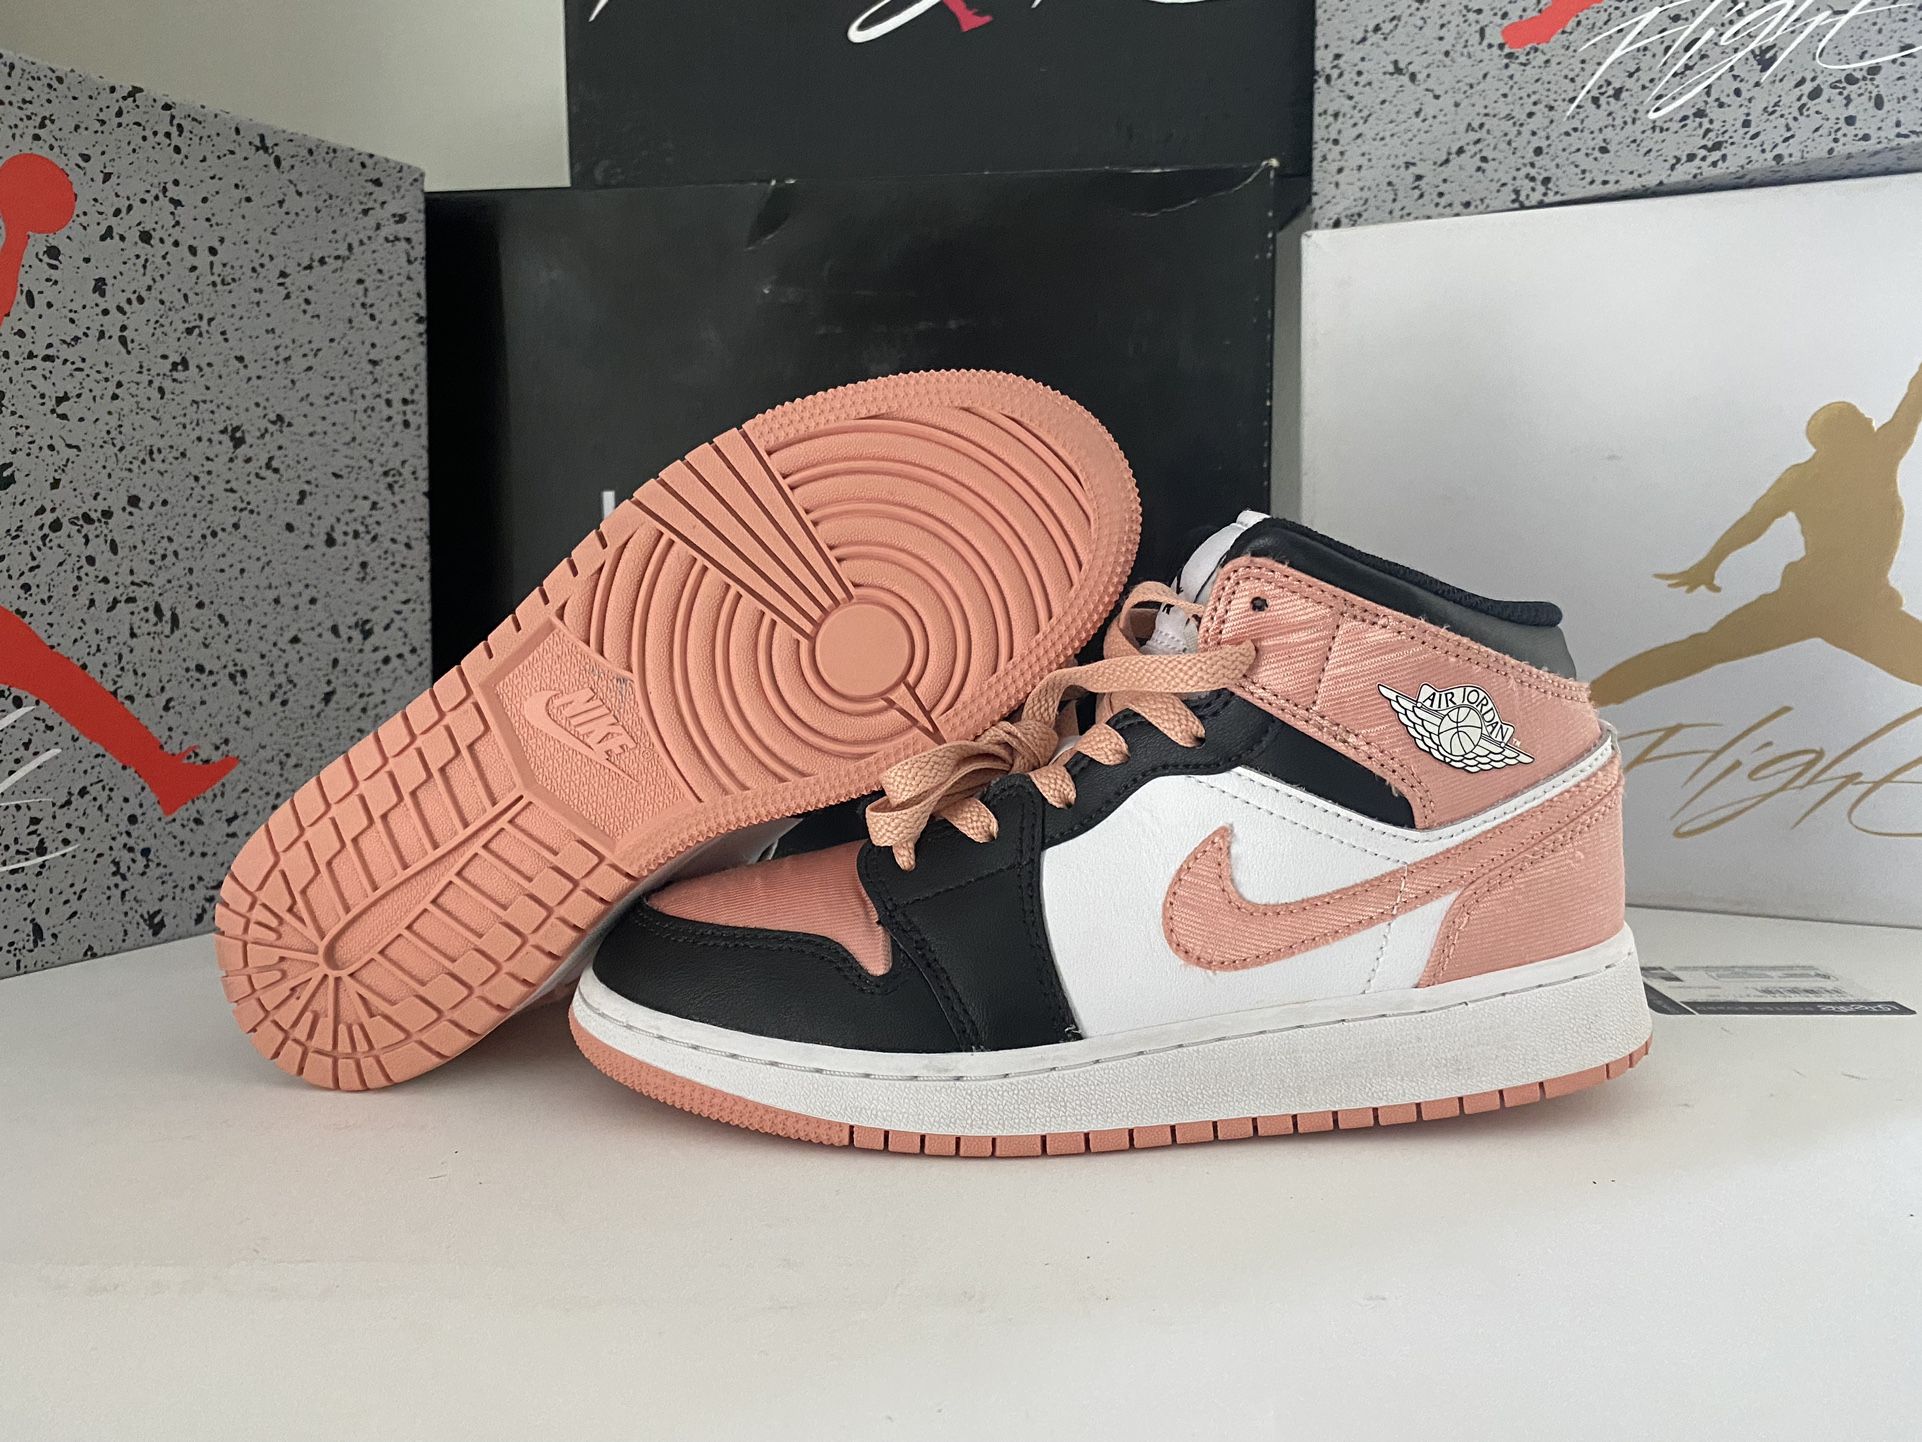 Air jordan 1 mid Size 5y ( pick up only)